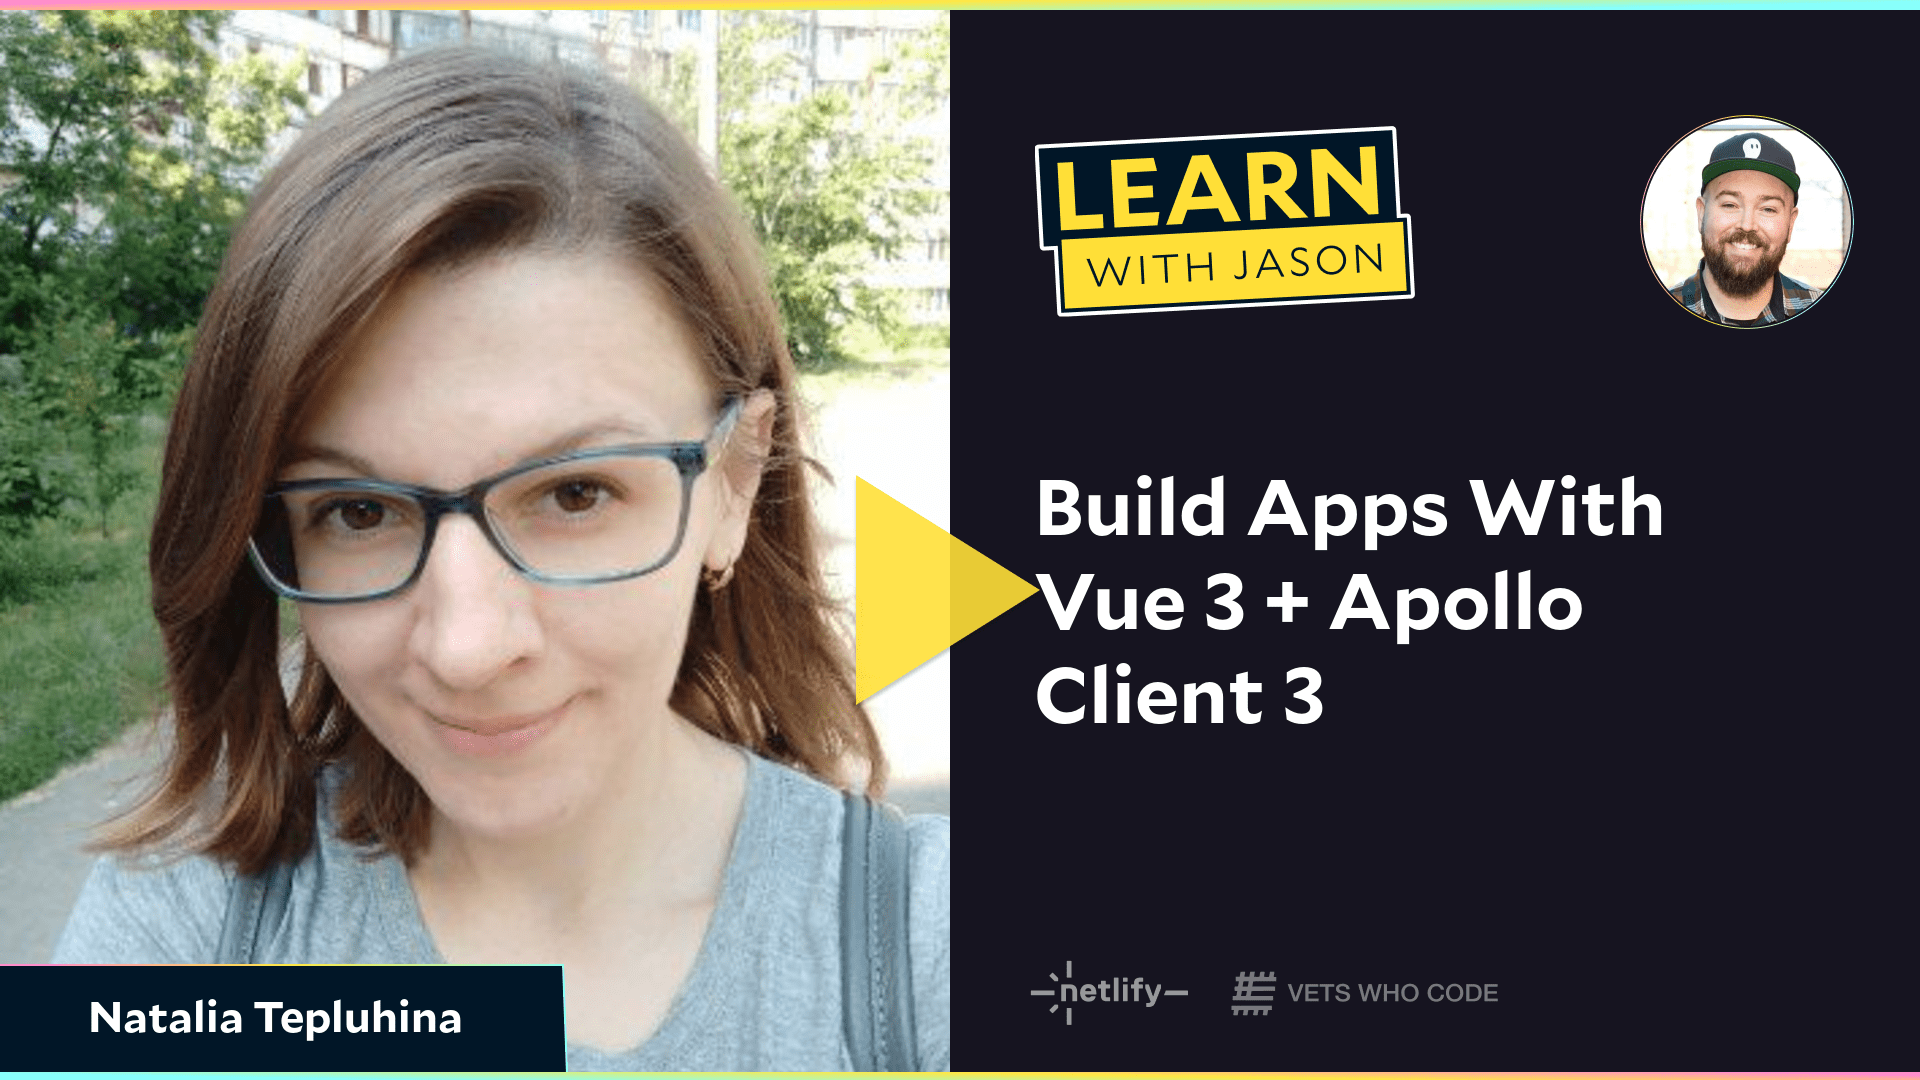 Build Apps With Vue 3 + Apollo Client 3 (with Natalia Tepluhina)